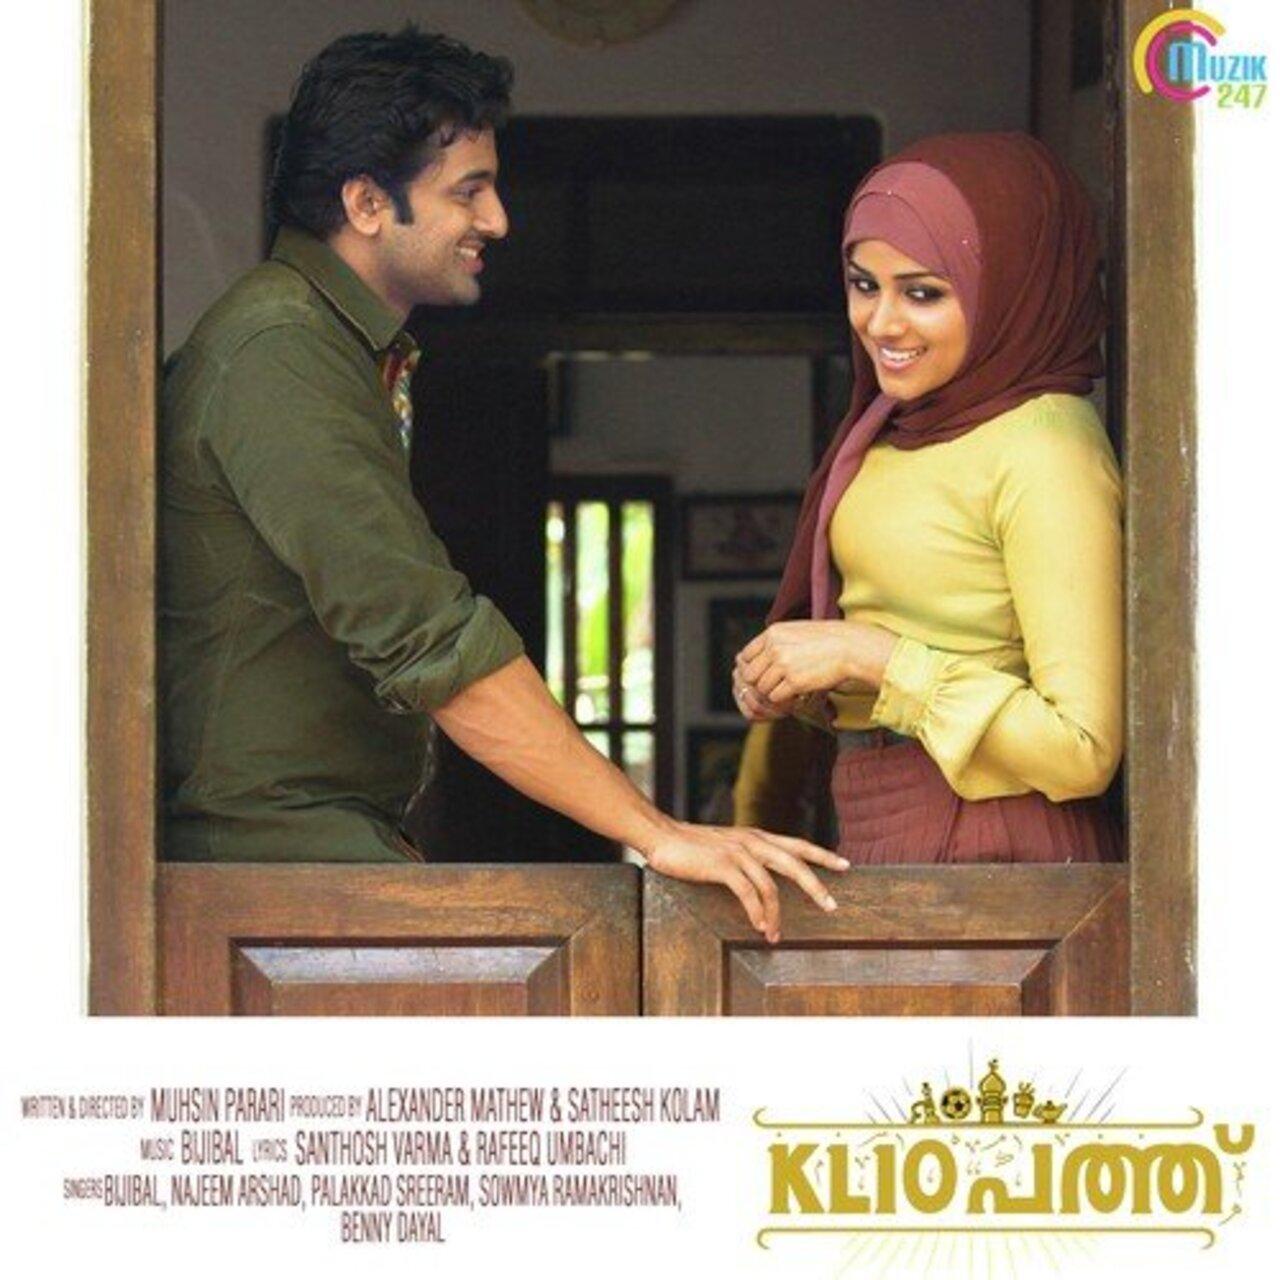 'Enthaanu Khalbe' is a Malayalam song known for its upbeat rhythm and catchy lyrics